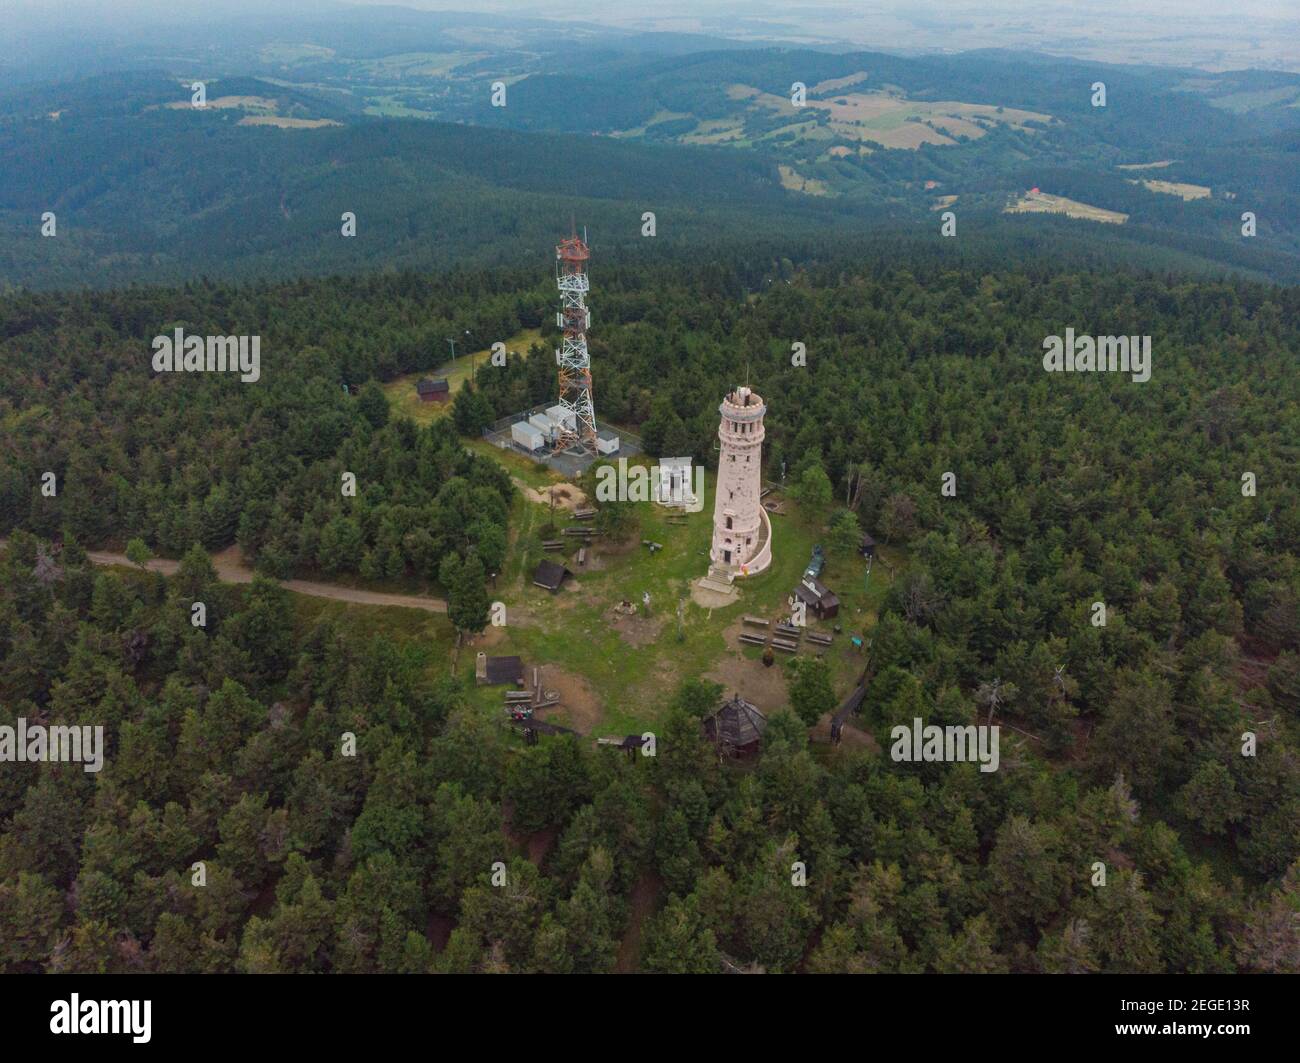 Pieszyce August 20 2019 Aerial drone view to Peak of Wielka Sowa mountain with towers between trees Stock Photo